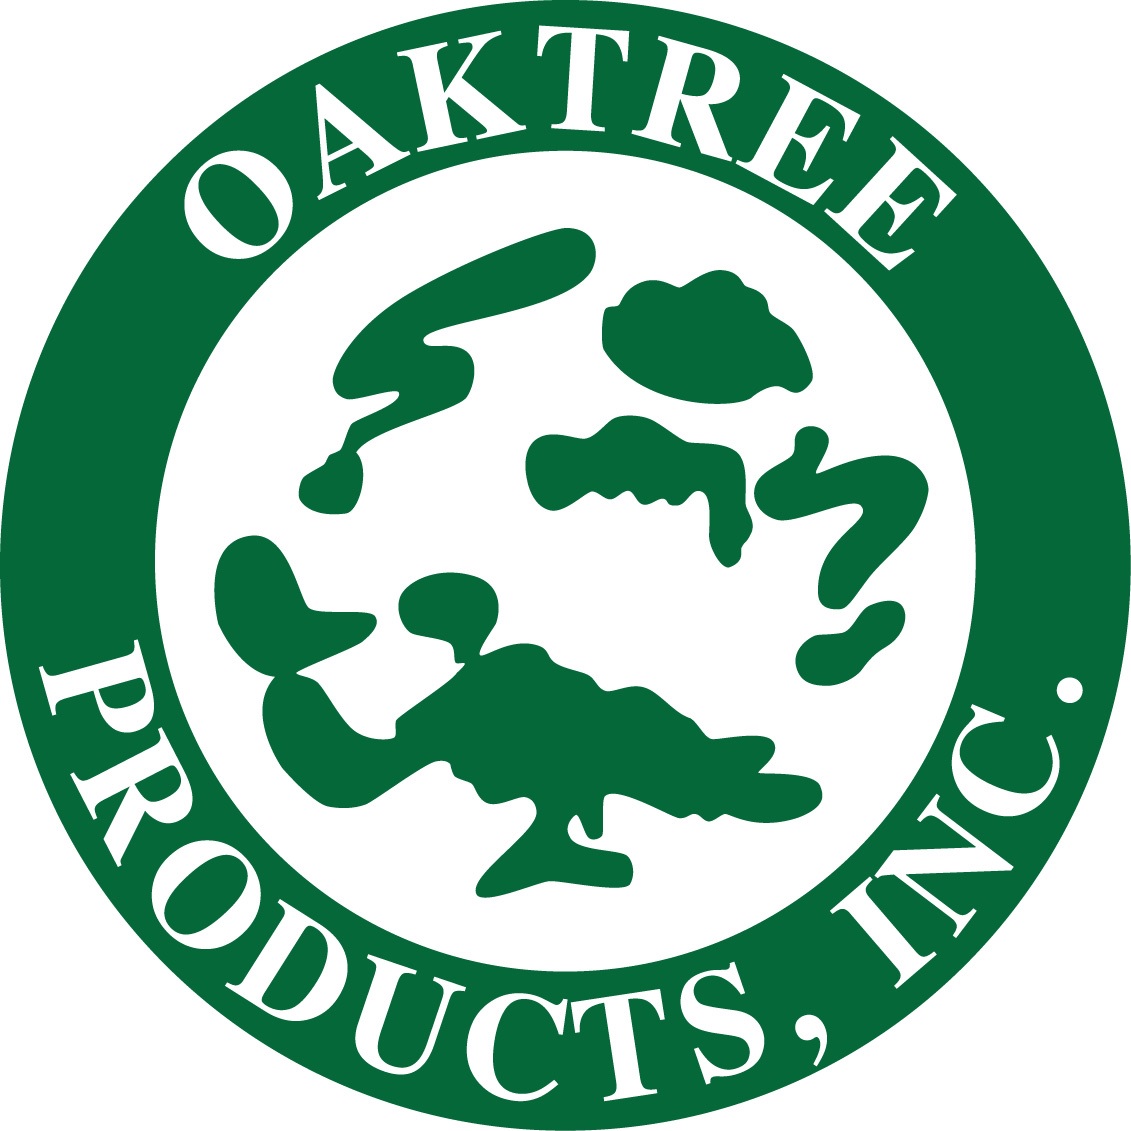 Oaktree Products